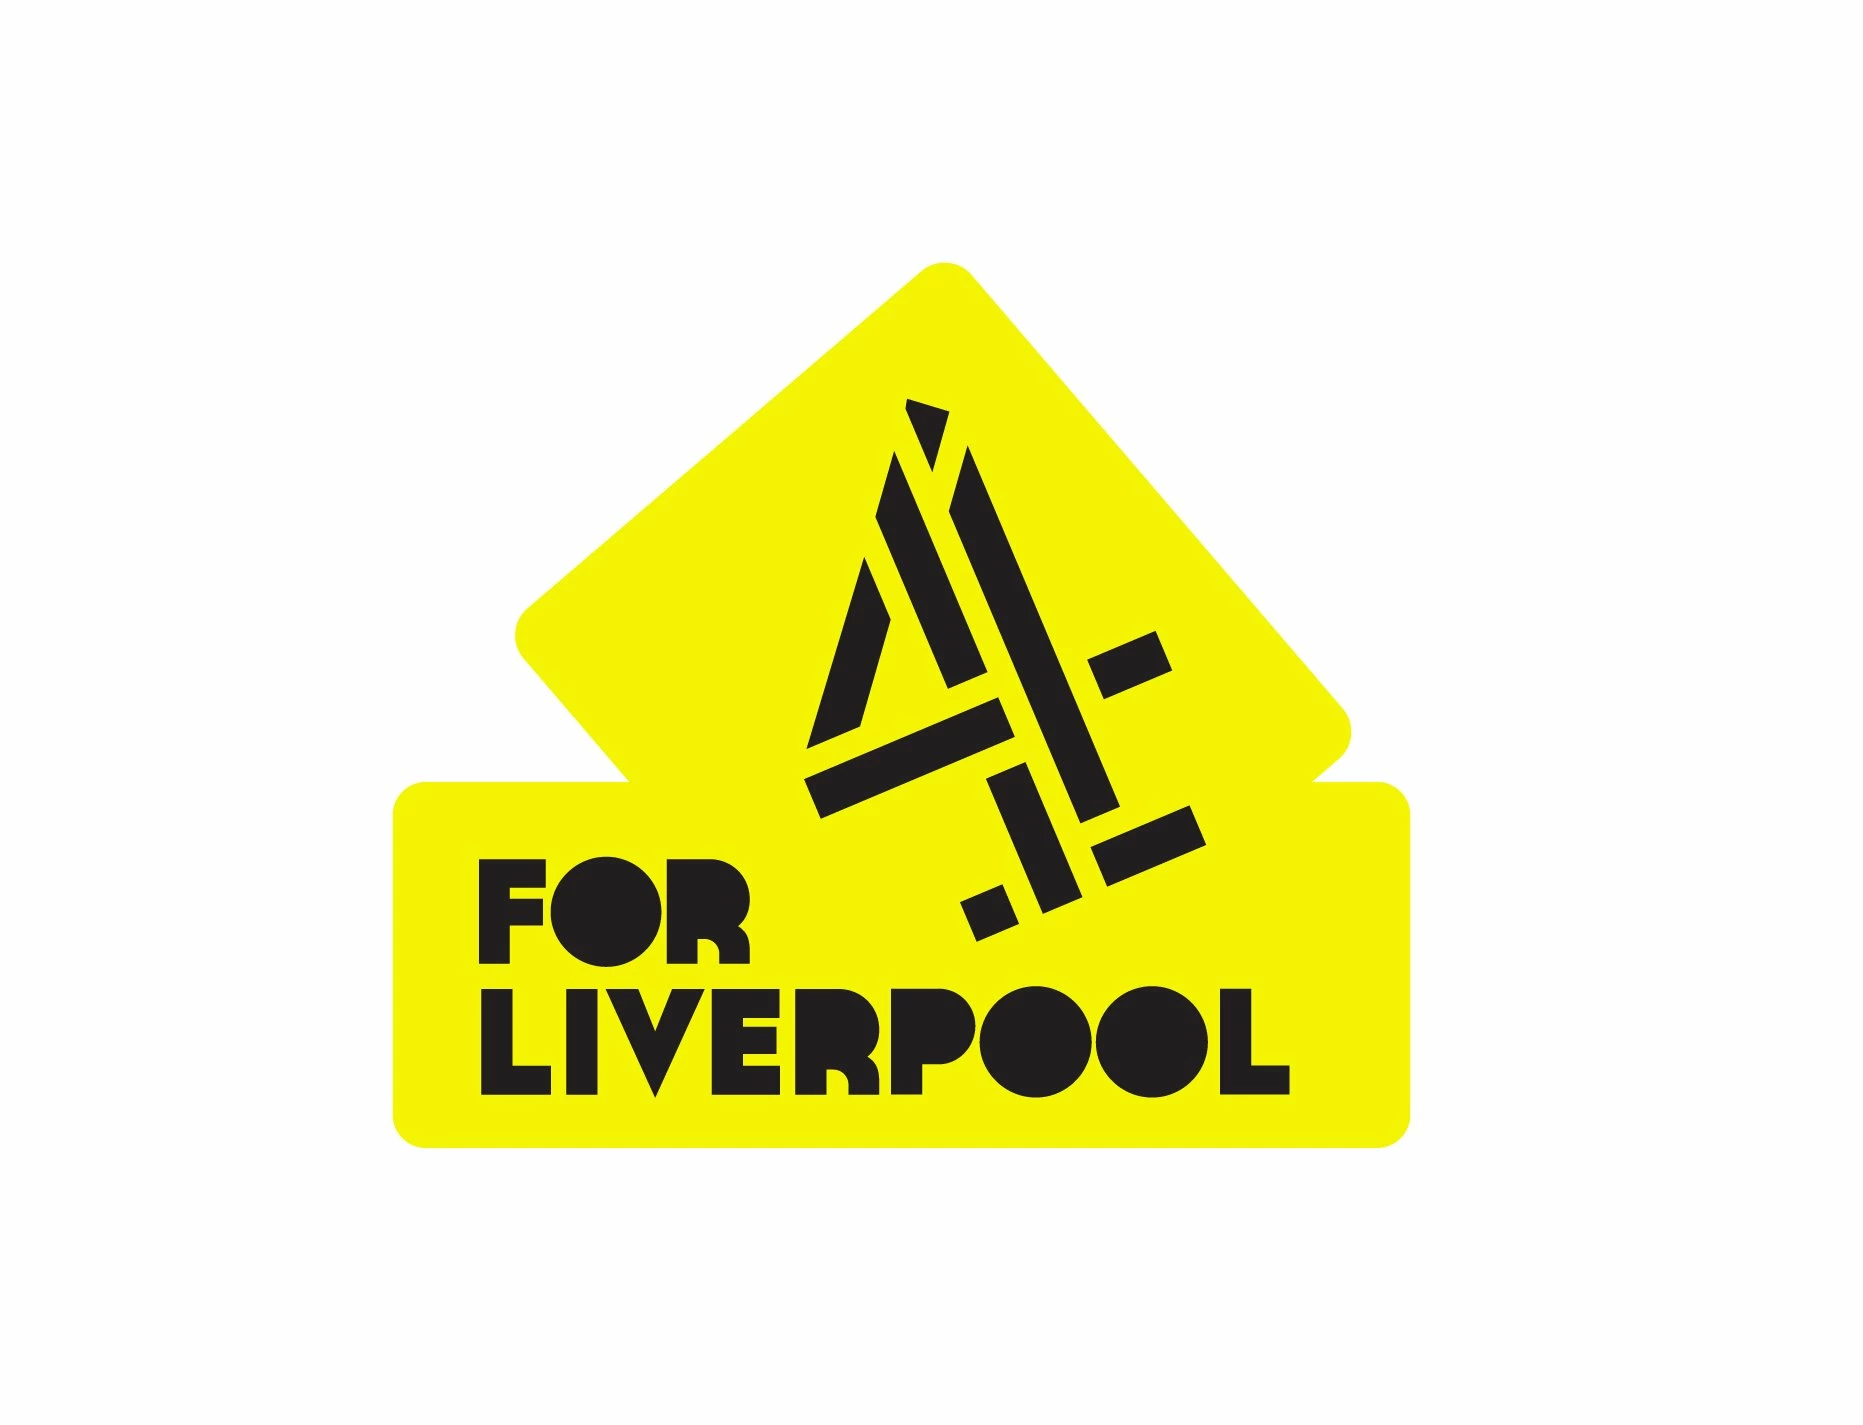 Students support Liverpool's Channel 4 bid